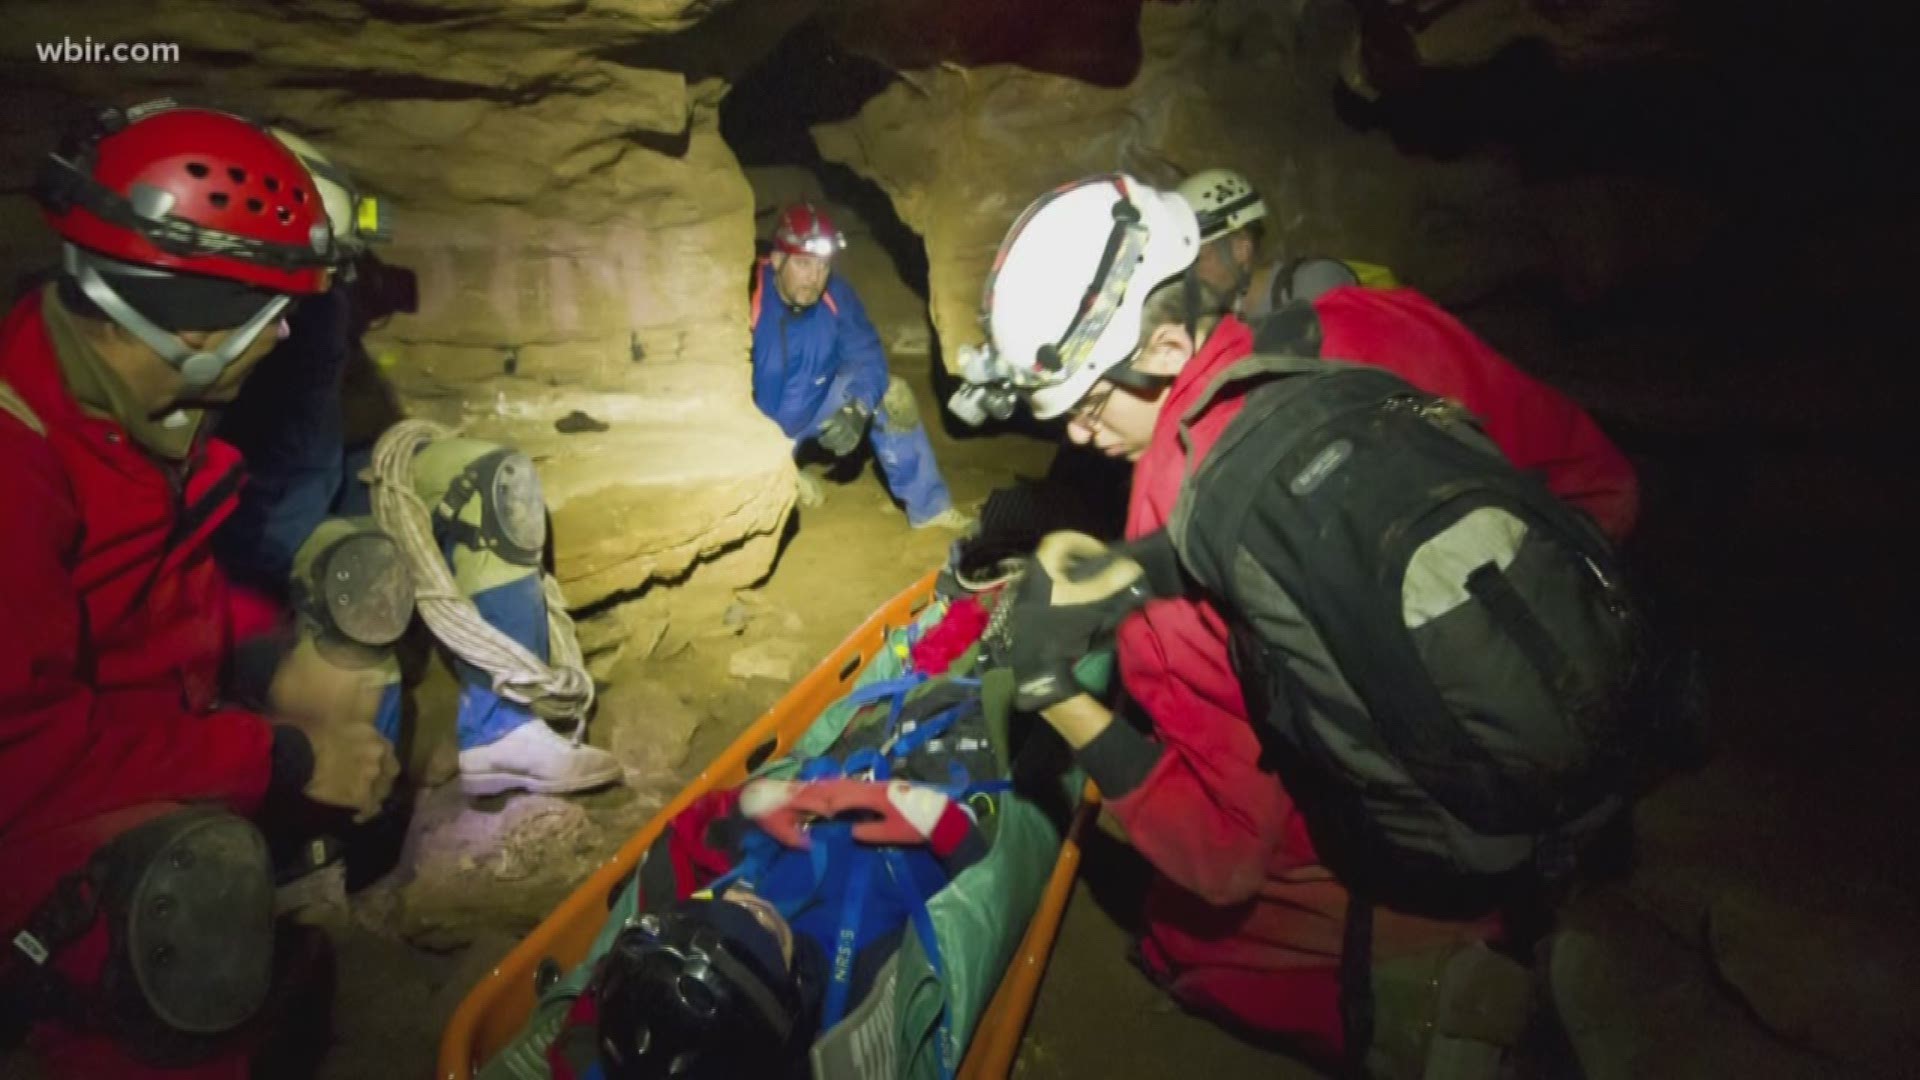 The Knox County Volunteer Rescue Squad has a unit dedicated to rescuing people out of caves. Now, they are warning people about the dangers that come with caves if you aren't prepared.